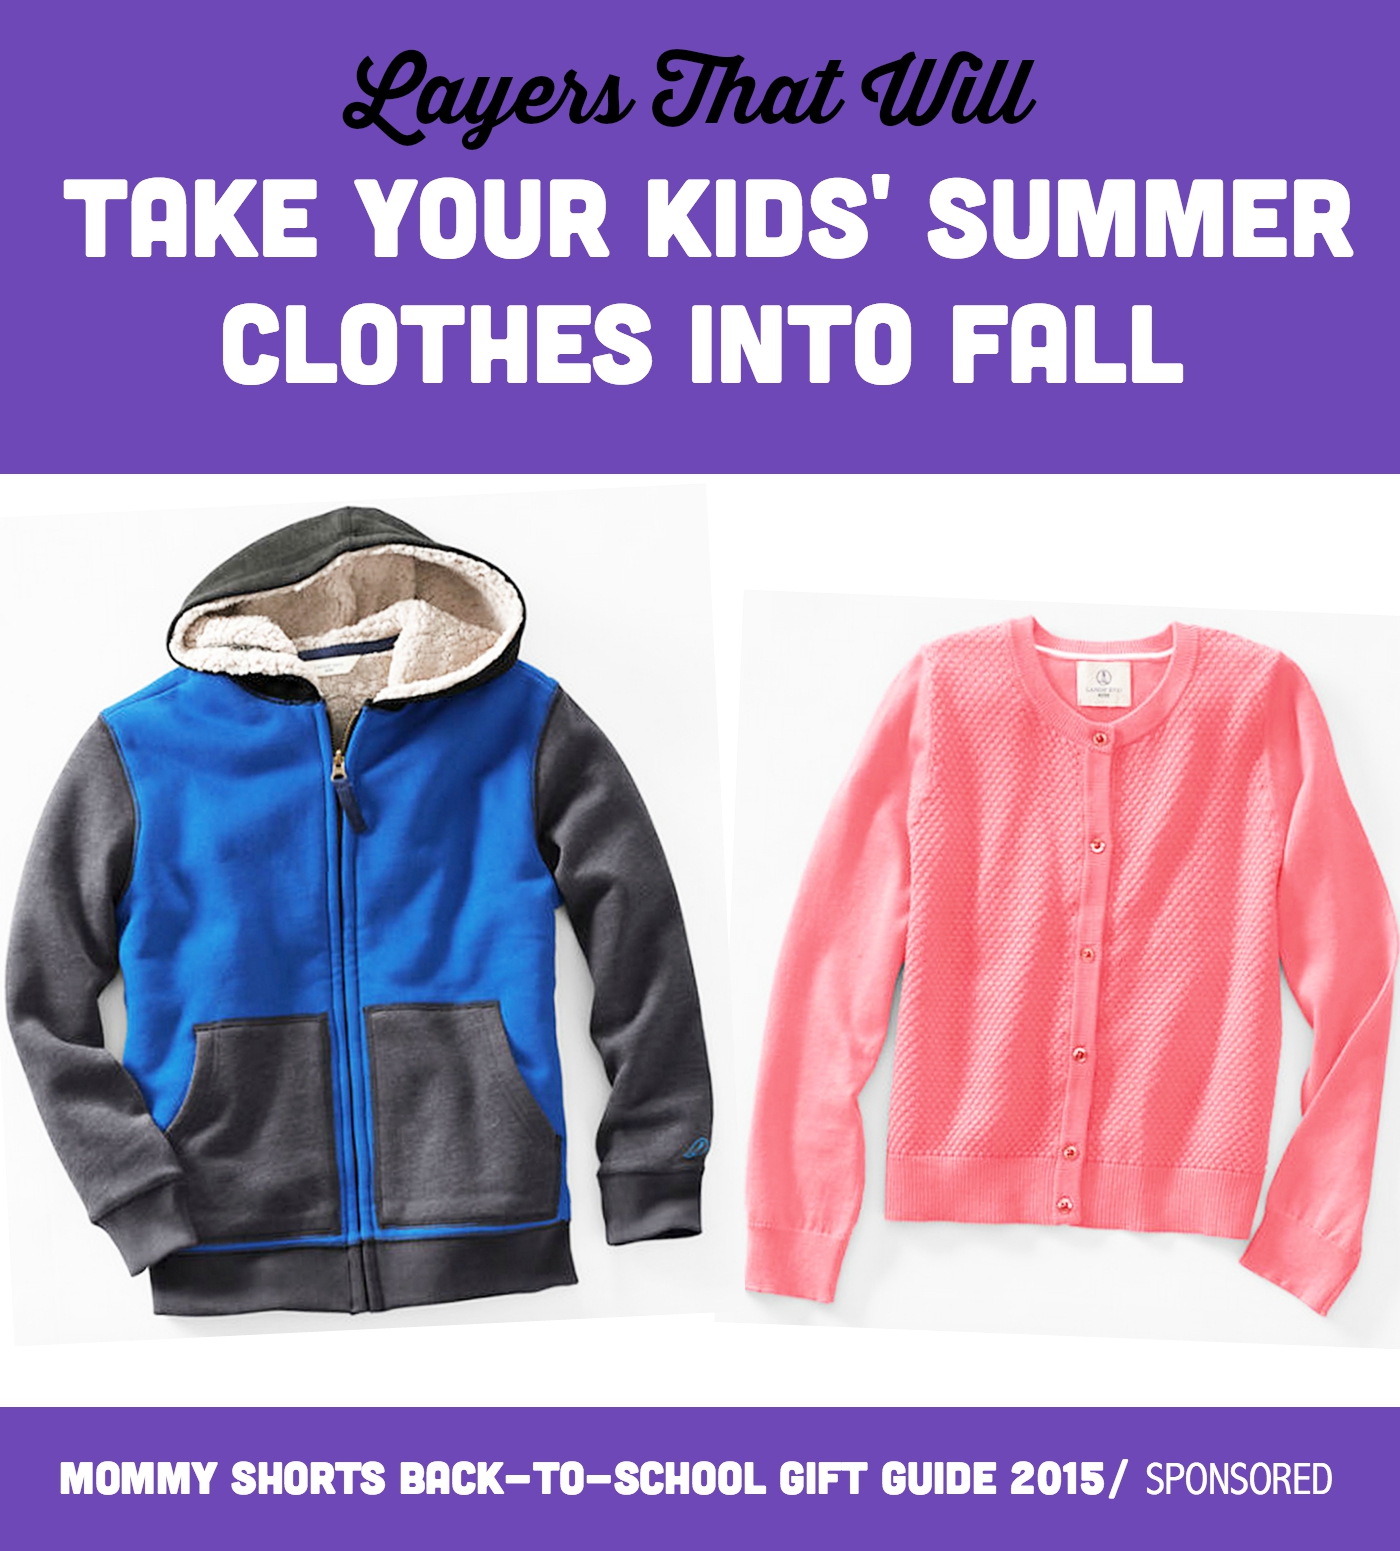 Layers That Will Take Your Kids' Summer Clothes Into Fall